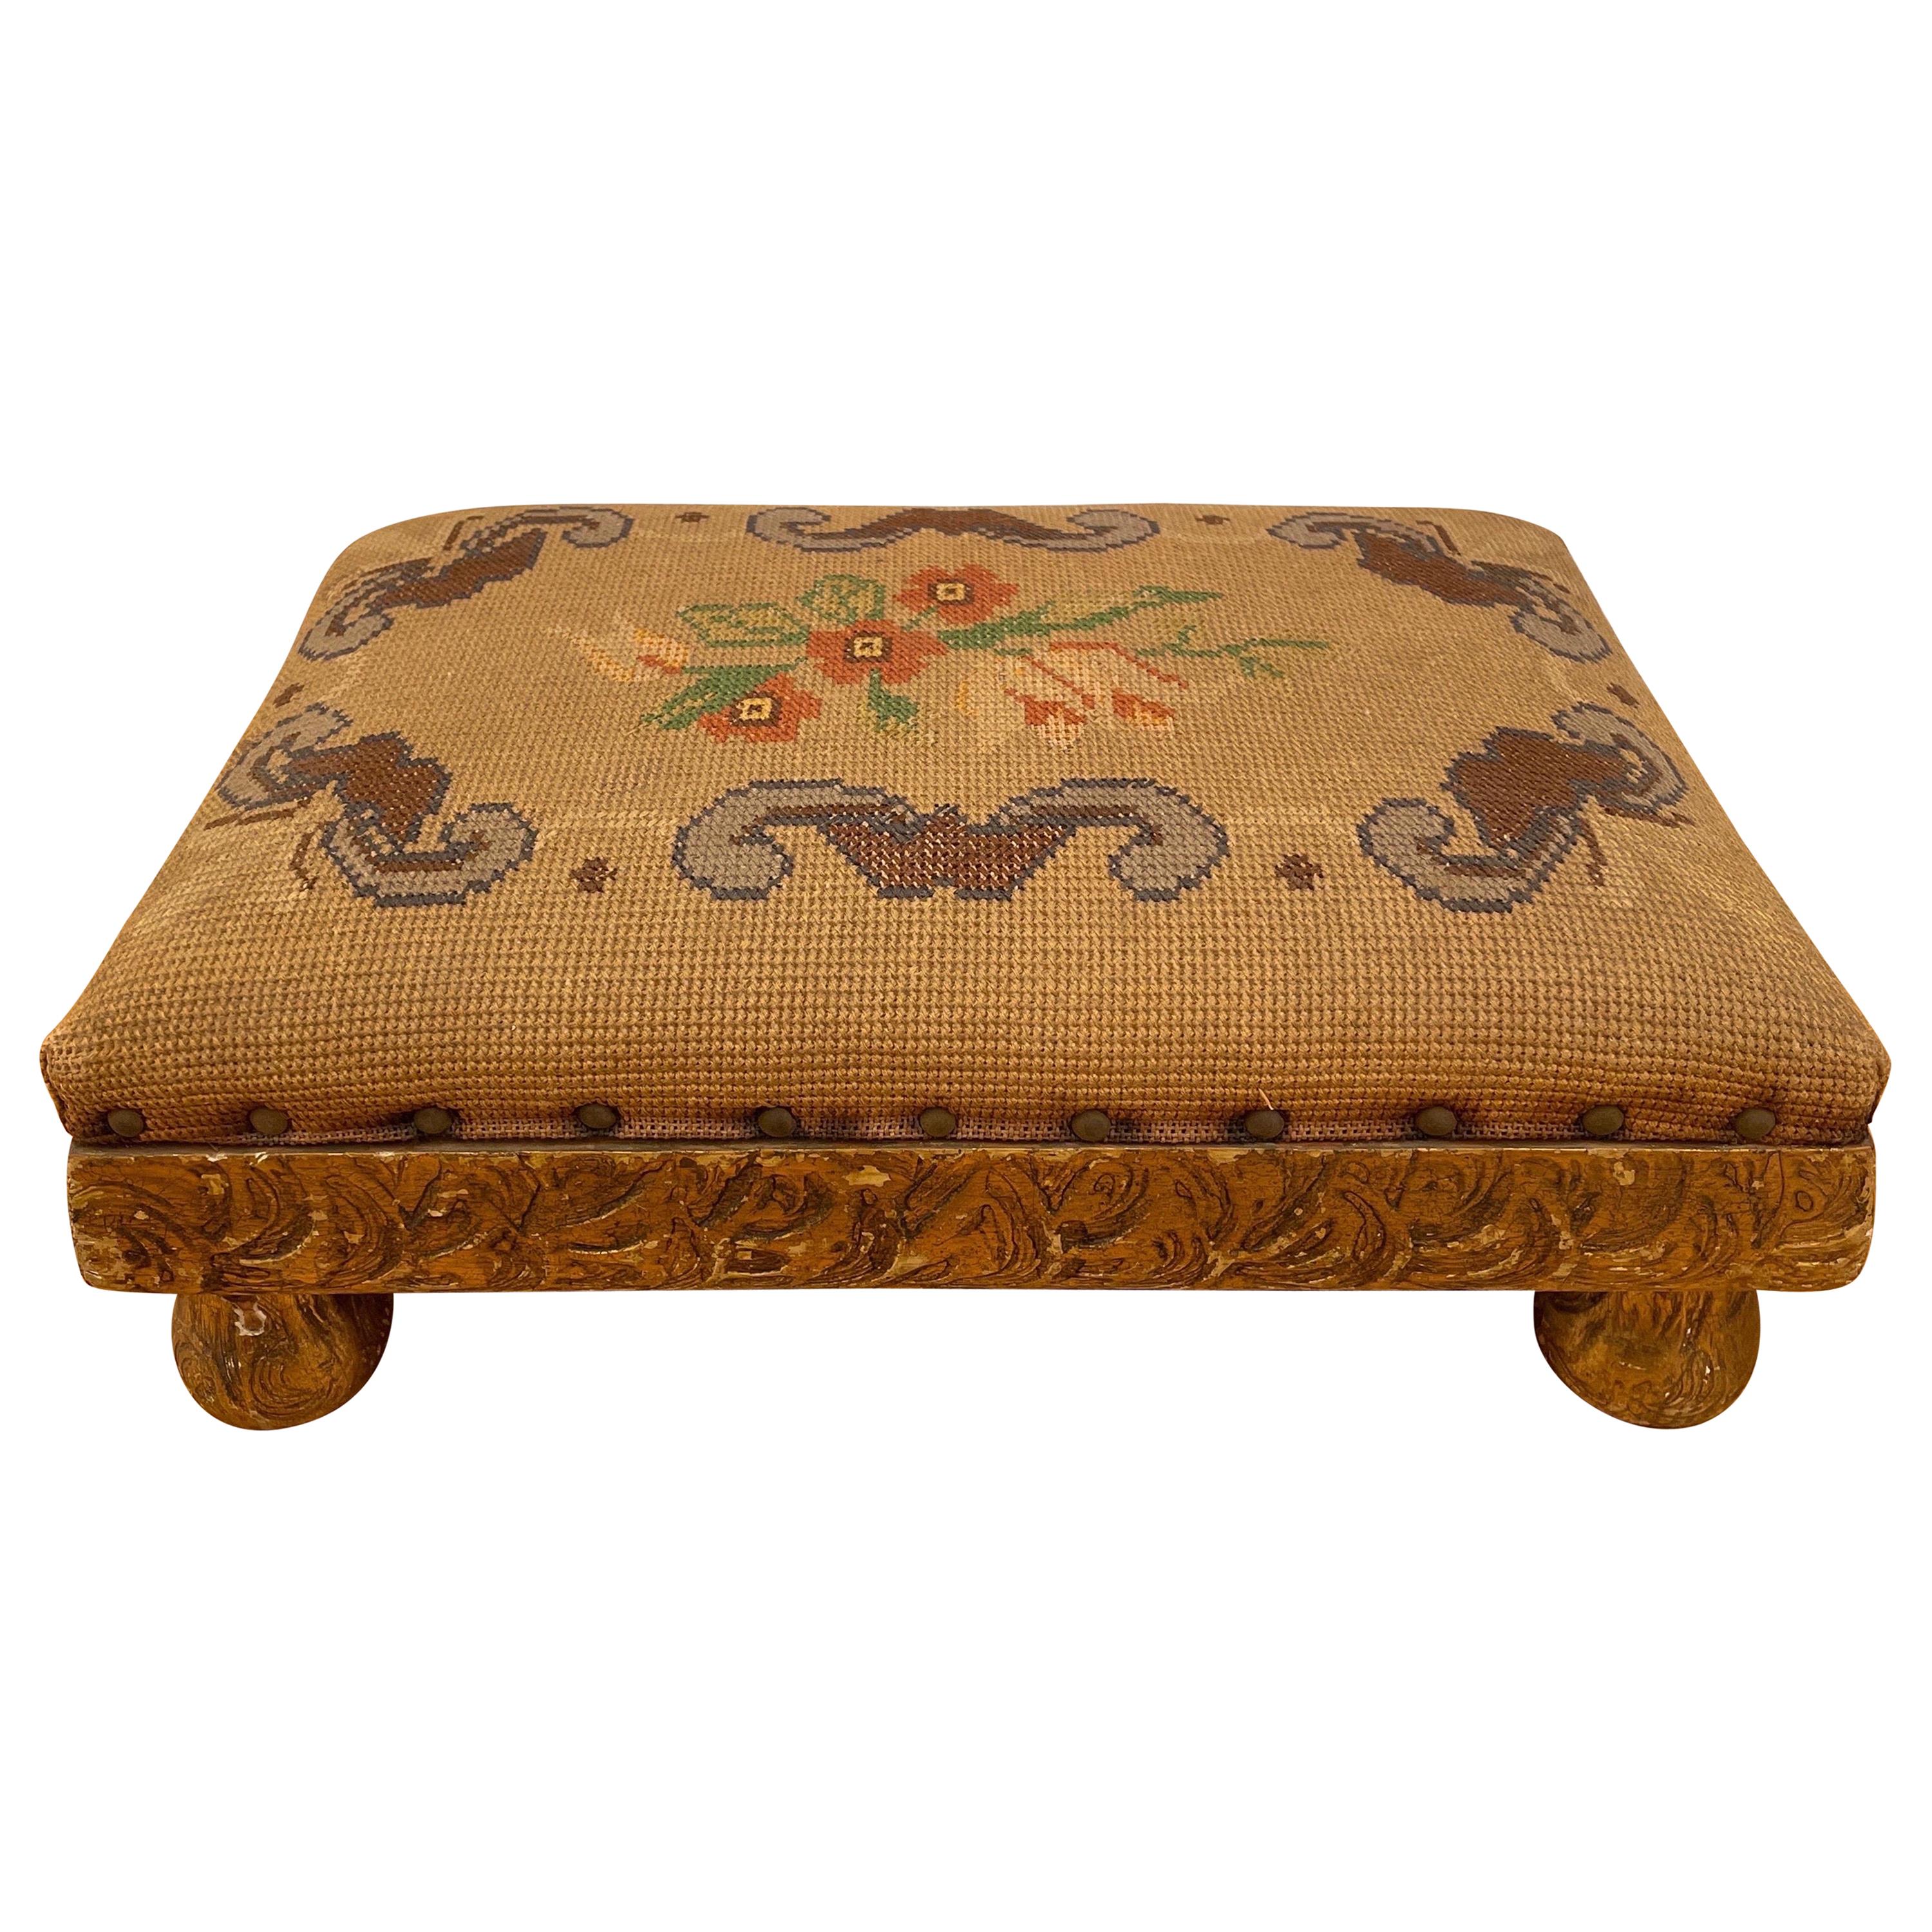 Gold Leaf Footstool with Hand Embroidery